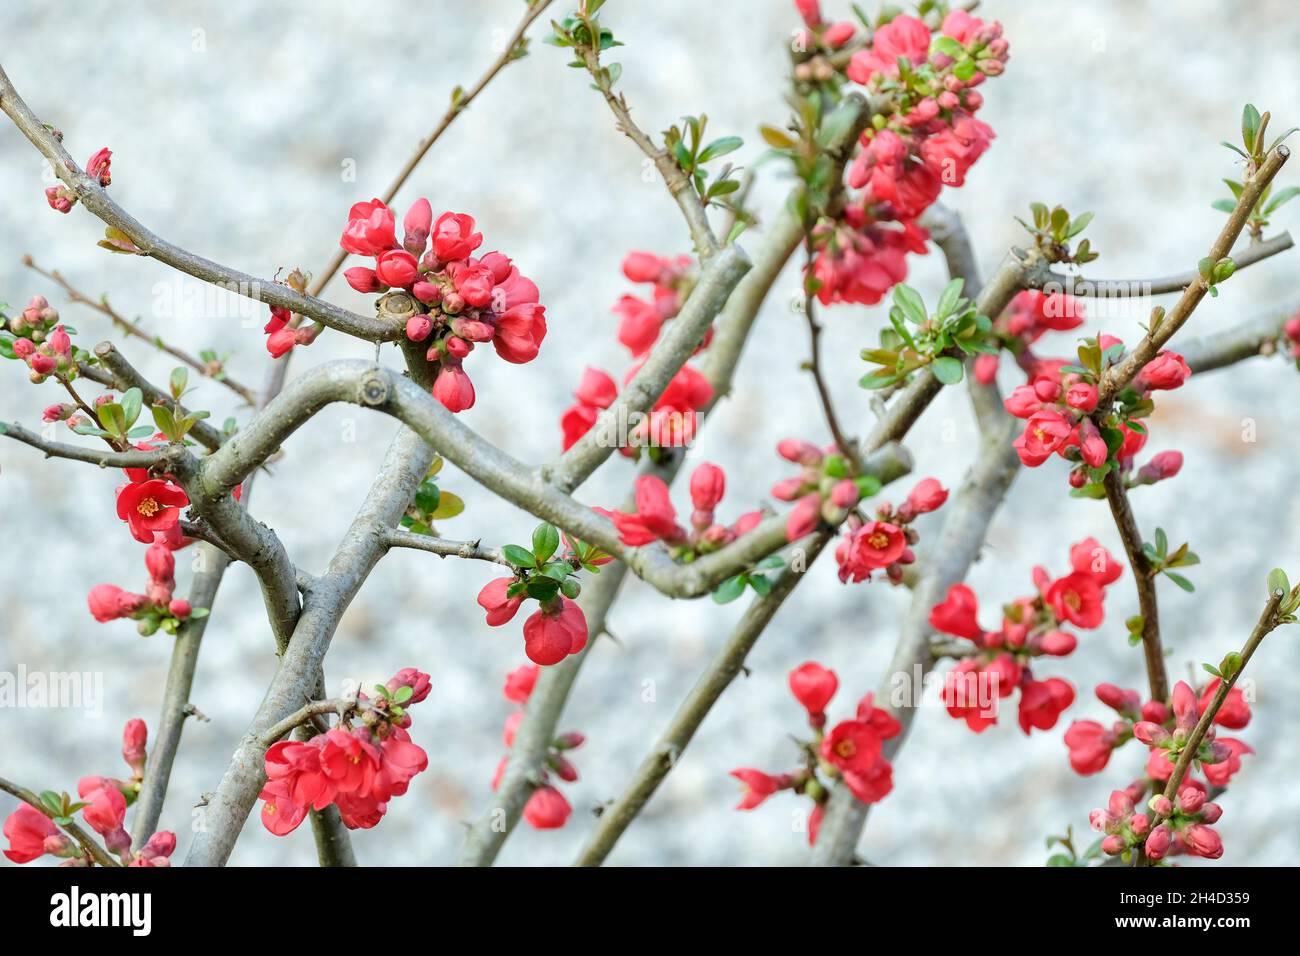 Chaenomeles speciosa, Japanese quince, Ornamental Quince, flowering quince, clusters of bright orange-scarlet flowers Stock Photo